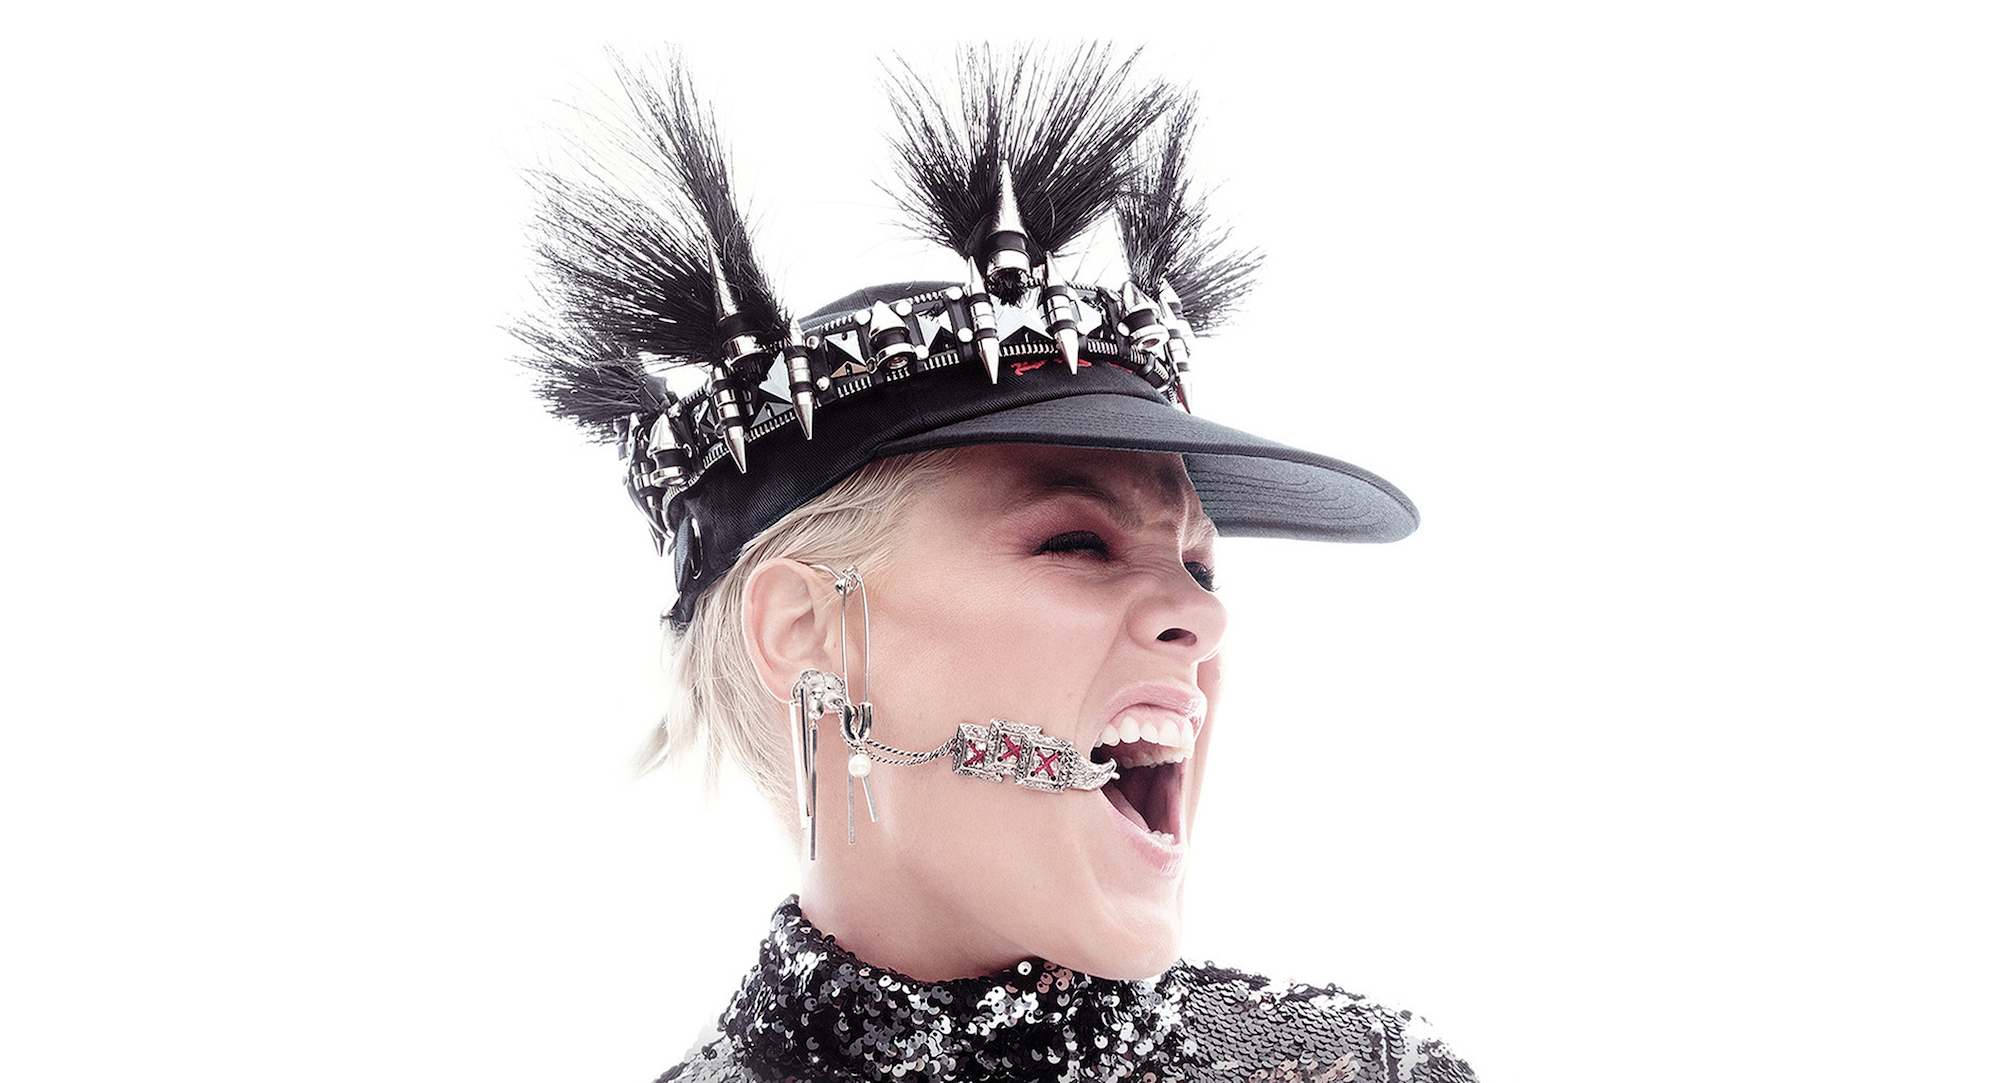 SOTD: P!NK gets it right again on glorious new track ‘Walk Me Home’